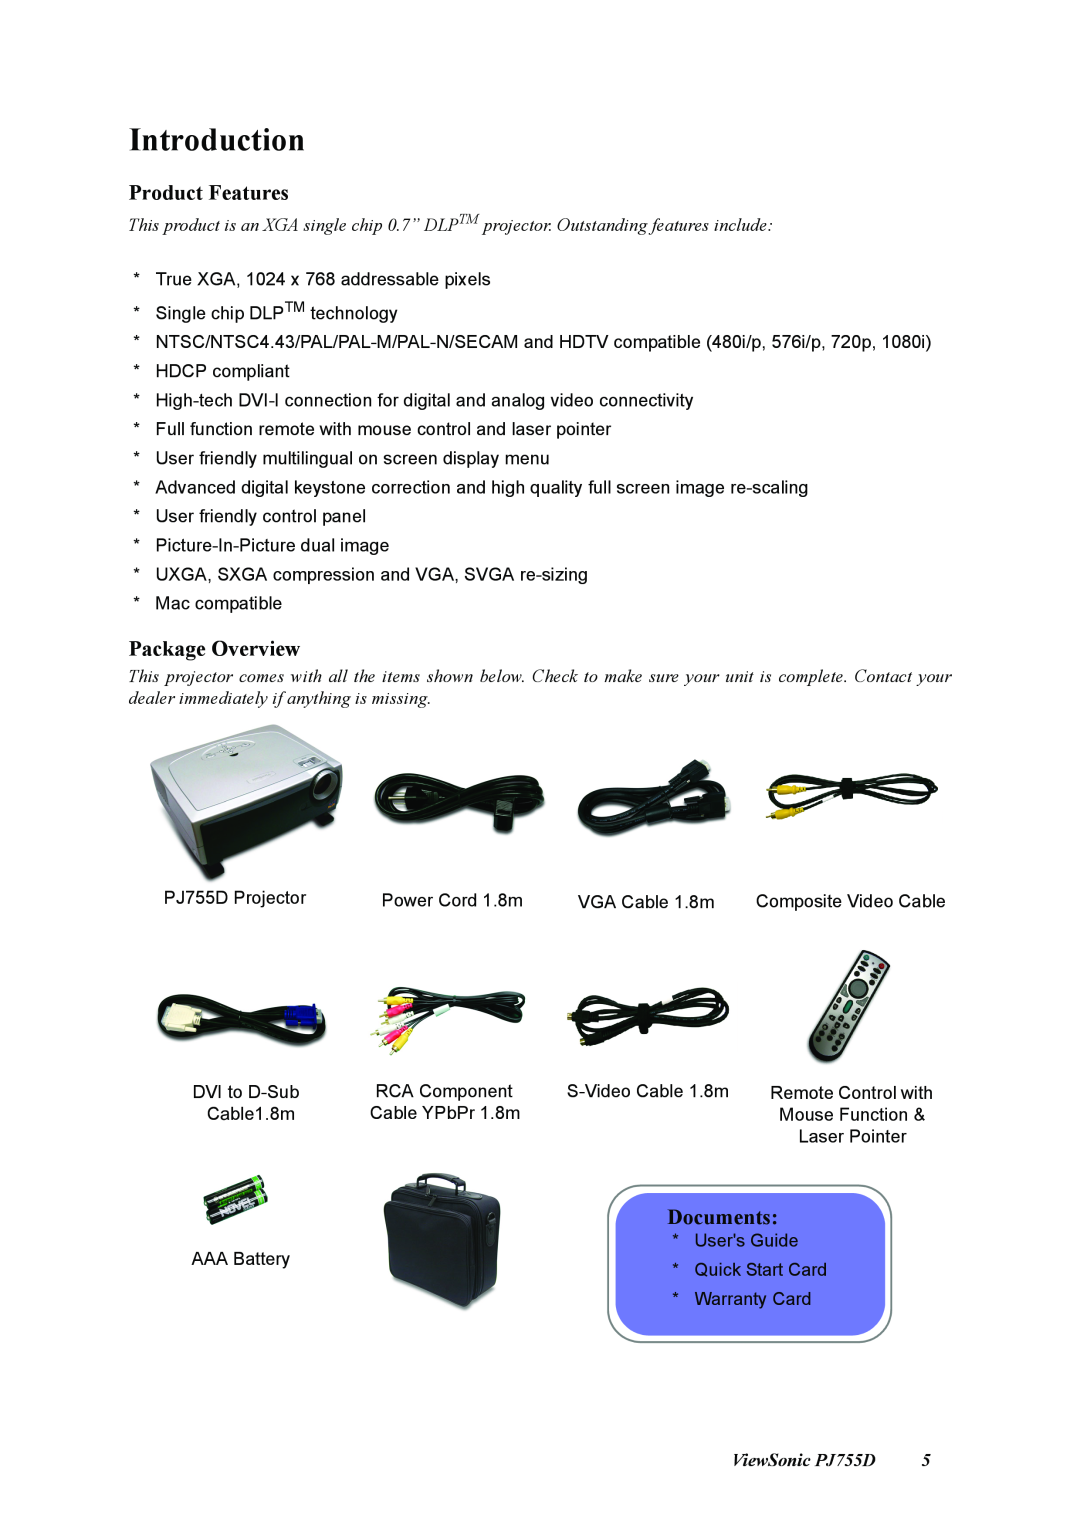 ViewSonic manual Introduction, Product Features, Package Overview, Documents, ViewSonic PJ755D 